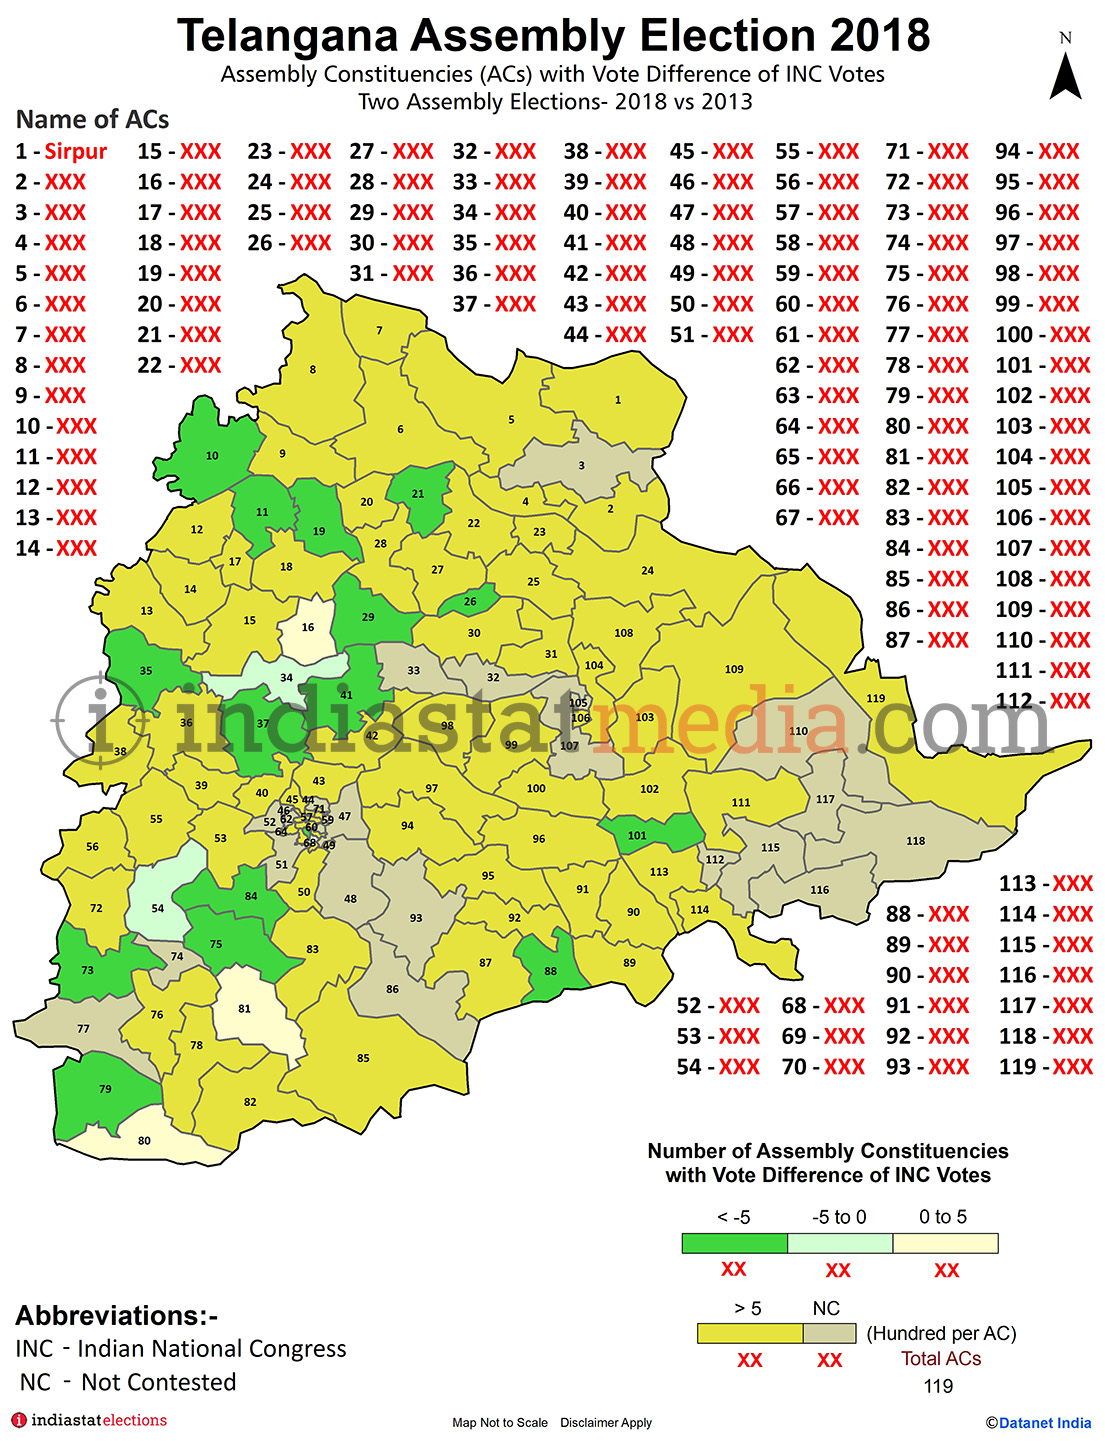 Assembly Constituencies with Vote Difference of INC Votes in Telangana (Assembly Elections - 2013 & 2018)